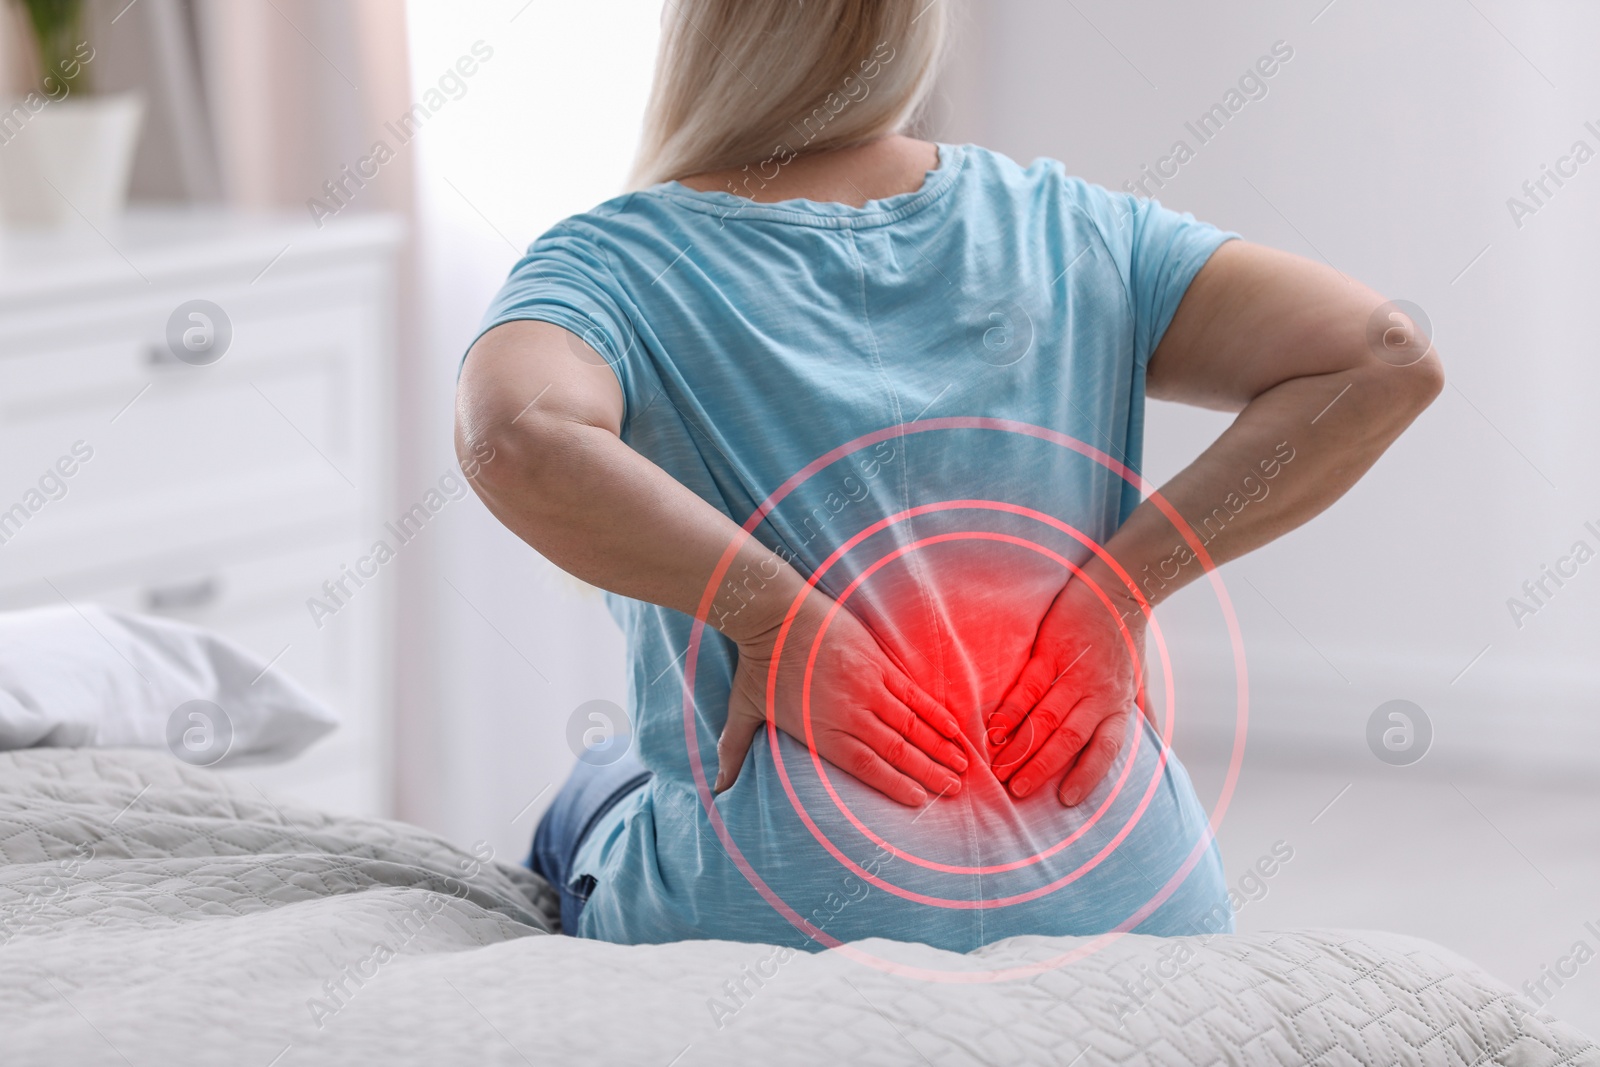 Image of Senior woman suffering from back pain after sleeping on uncomfortable mattress at home, closeup